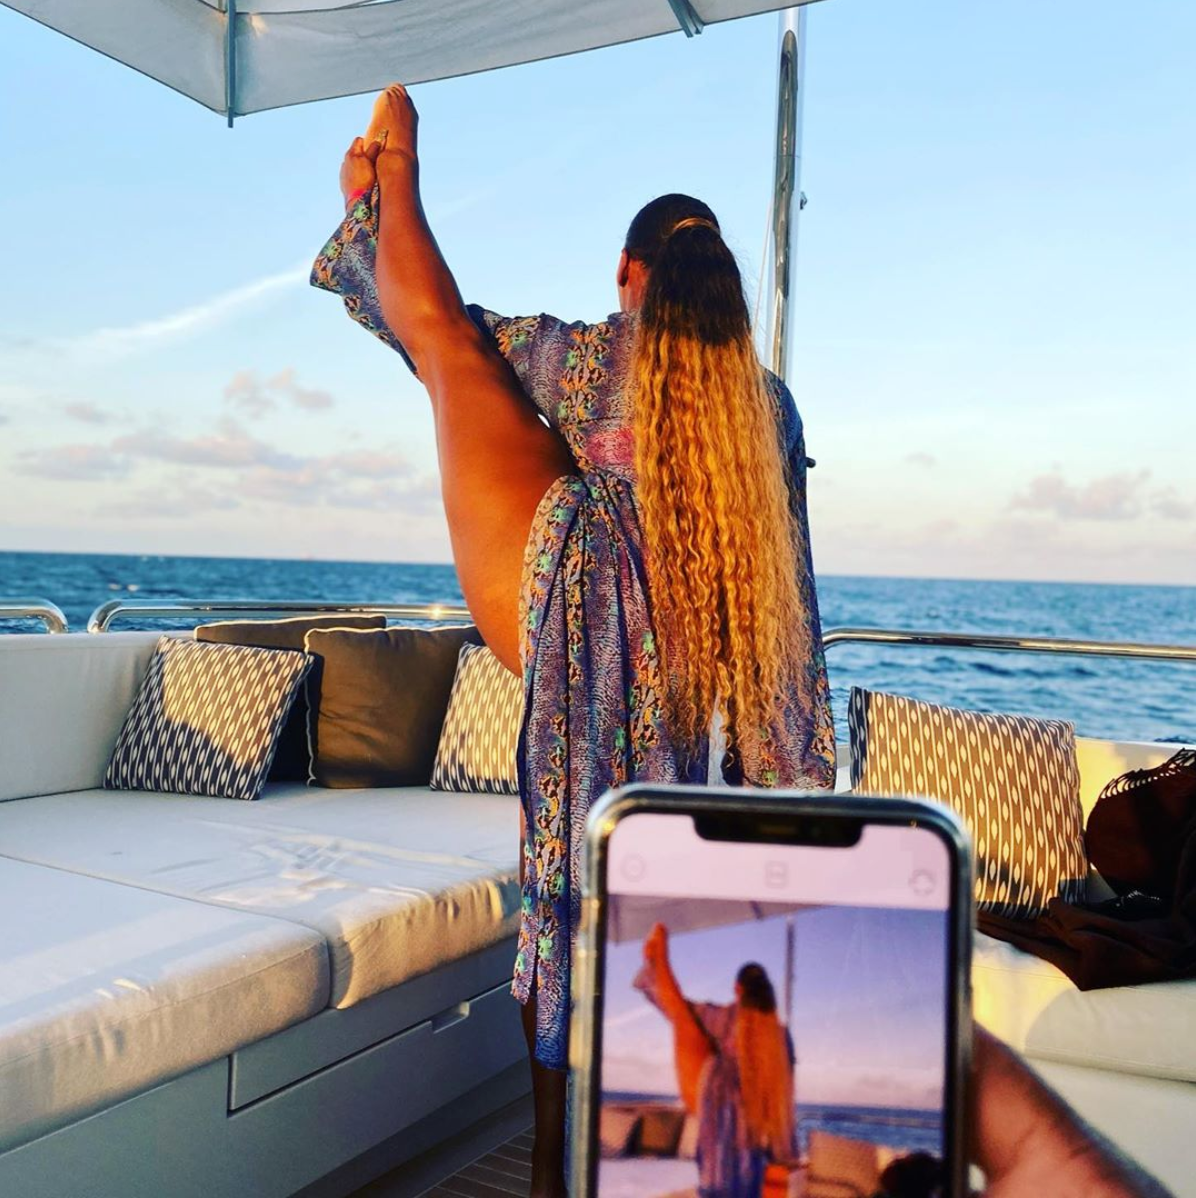 Serena And Venus Williams Turning Up On A Yacht Is All The Travel Motivation We Need